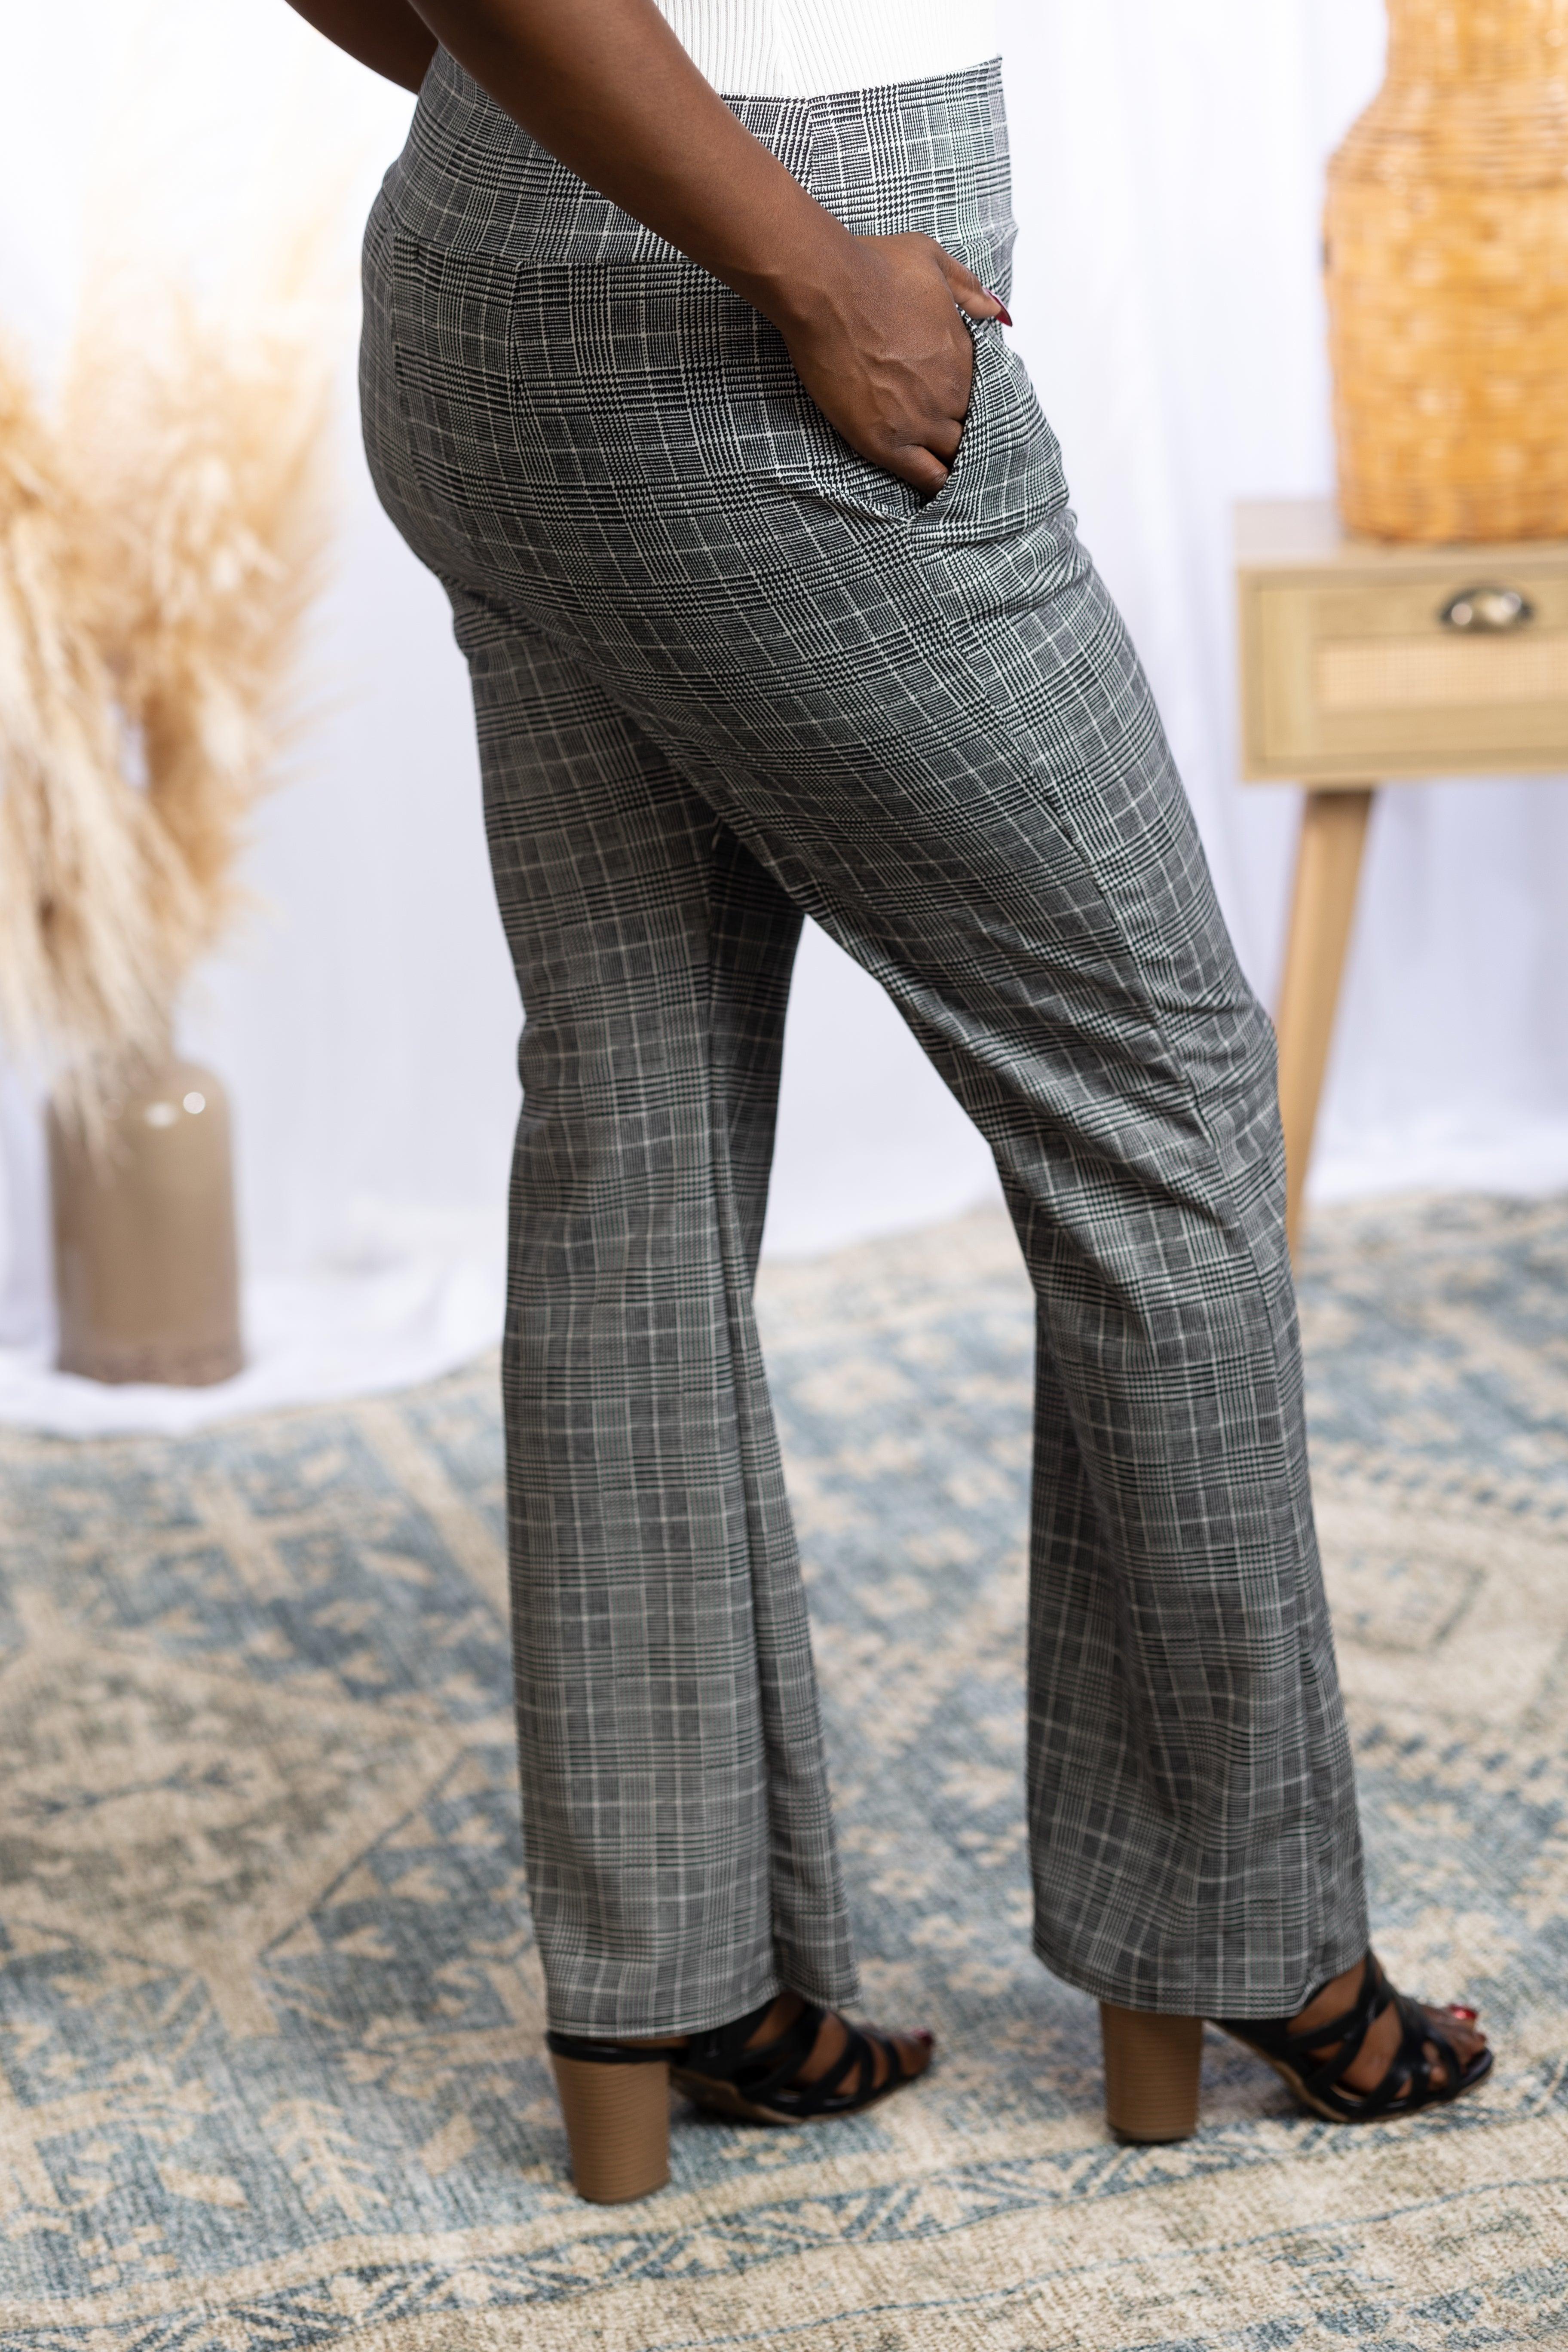 Headed Uptown - Plaid Flare Pants Giftmas Boutique Simplified   